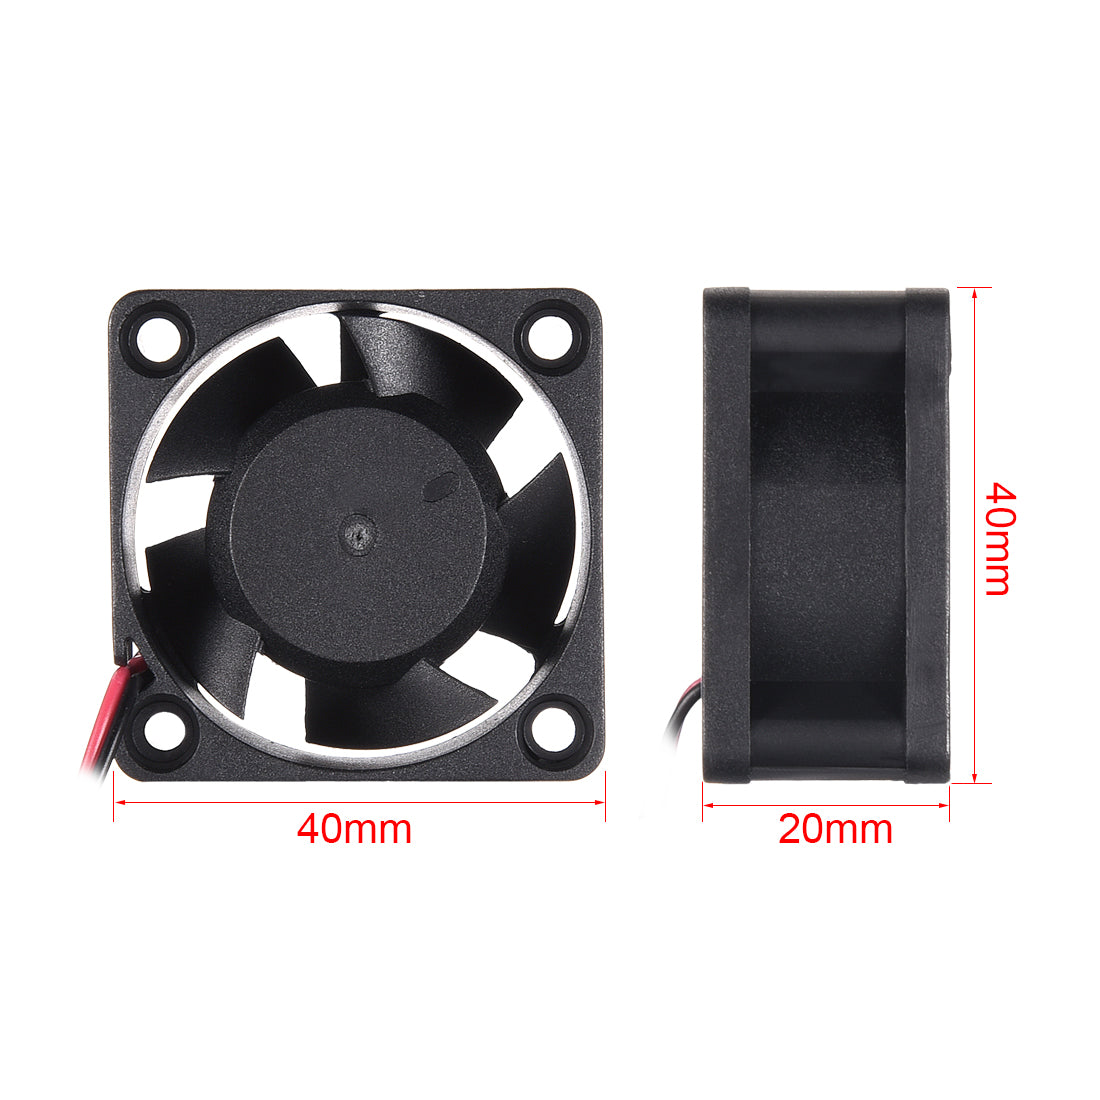 uxcell Uxcell SNOWFAN Authorized 40mm x 40mm x 20mm 12V Brushless DC Cooling Fan #0353